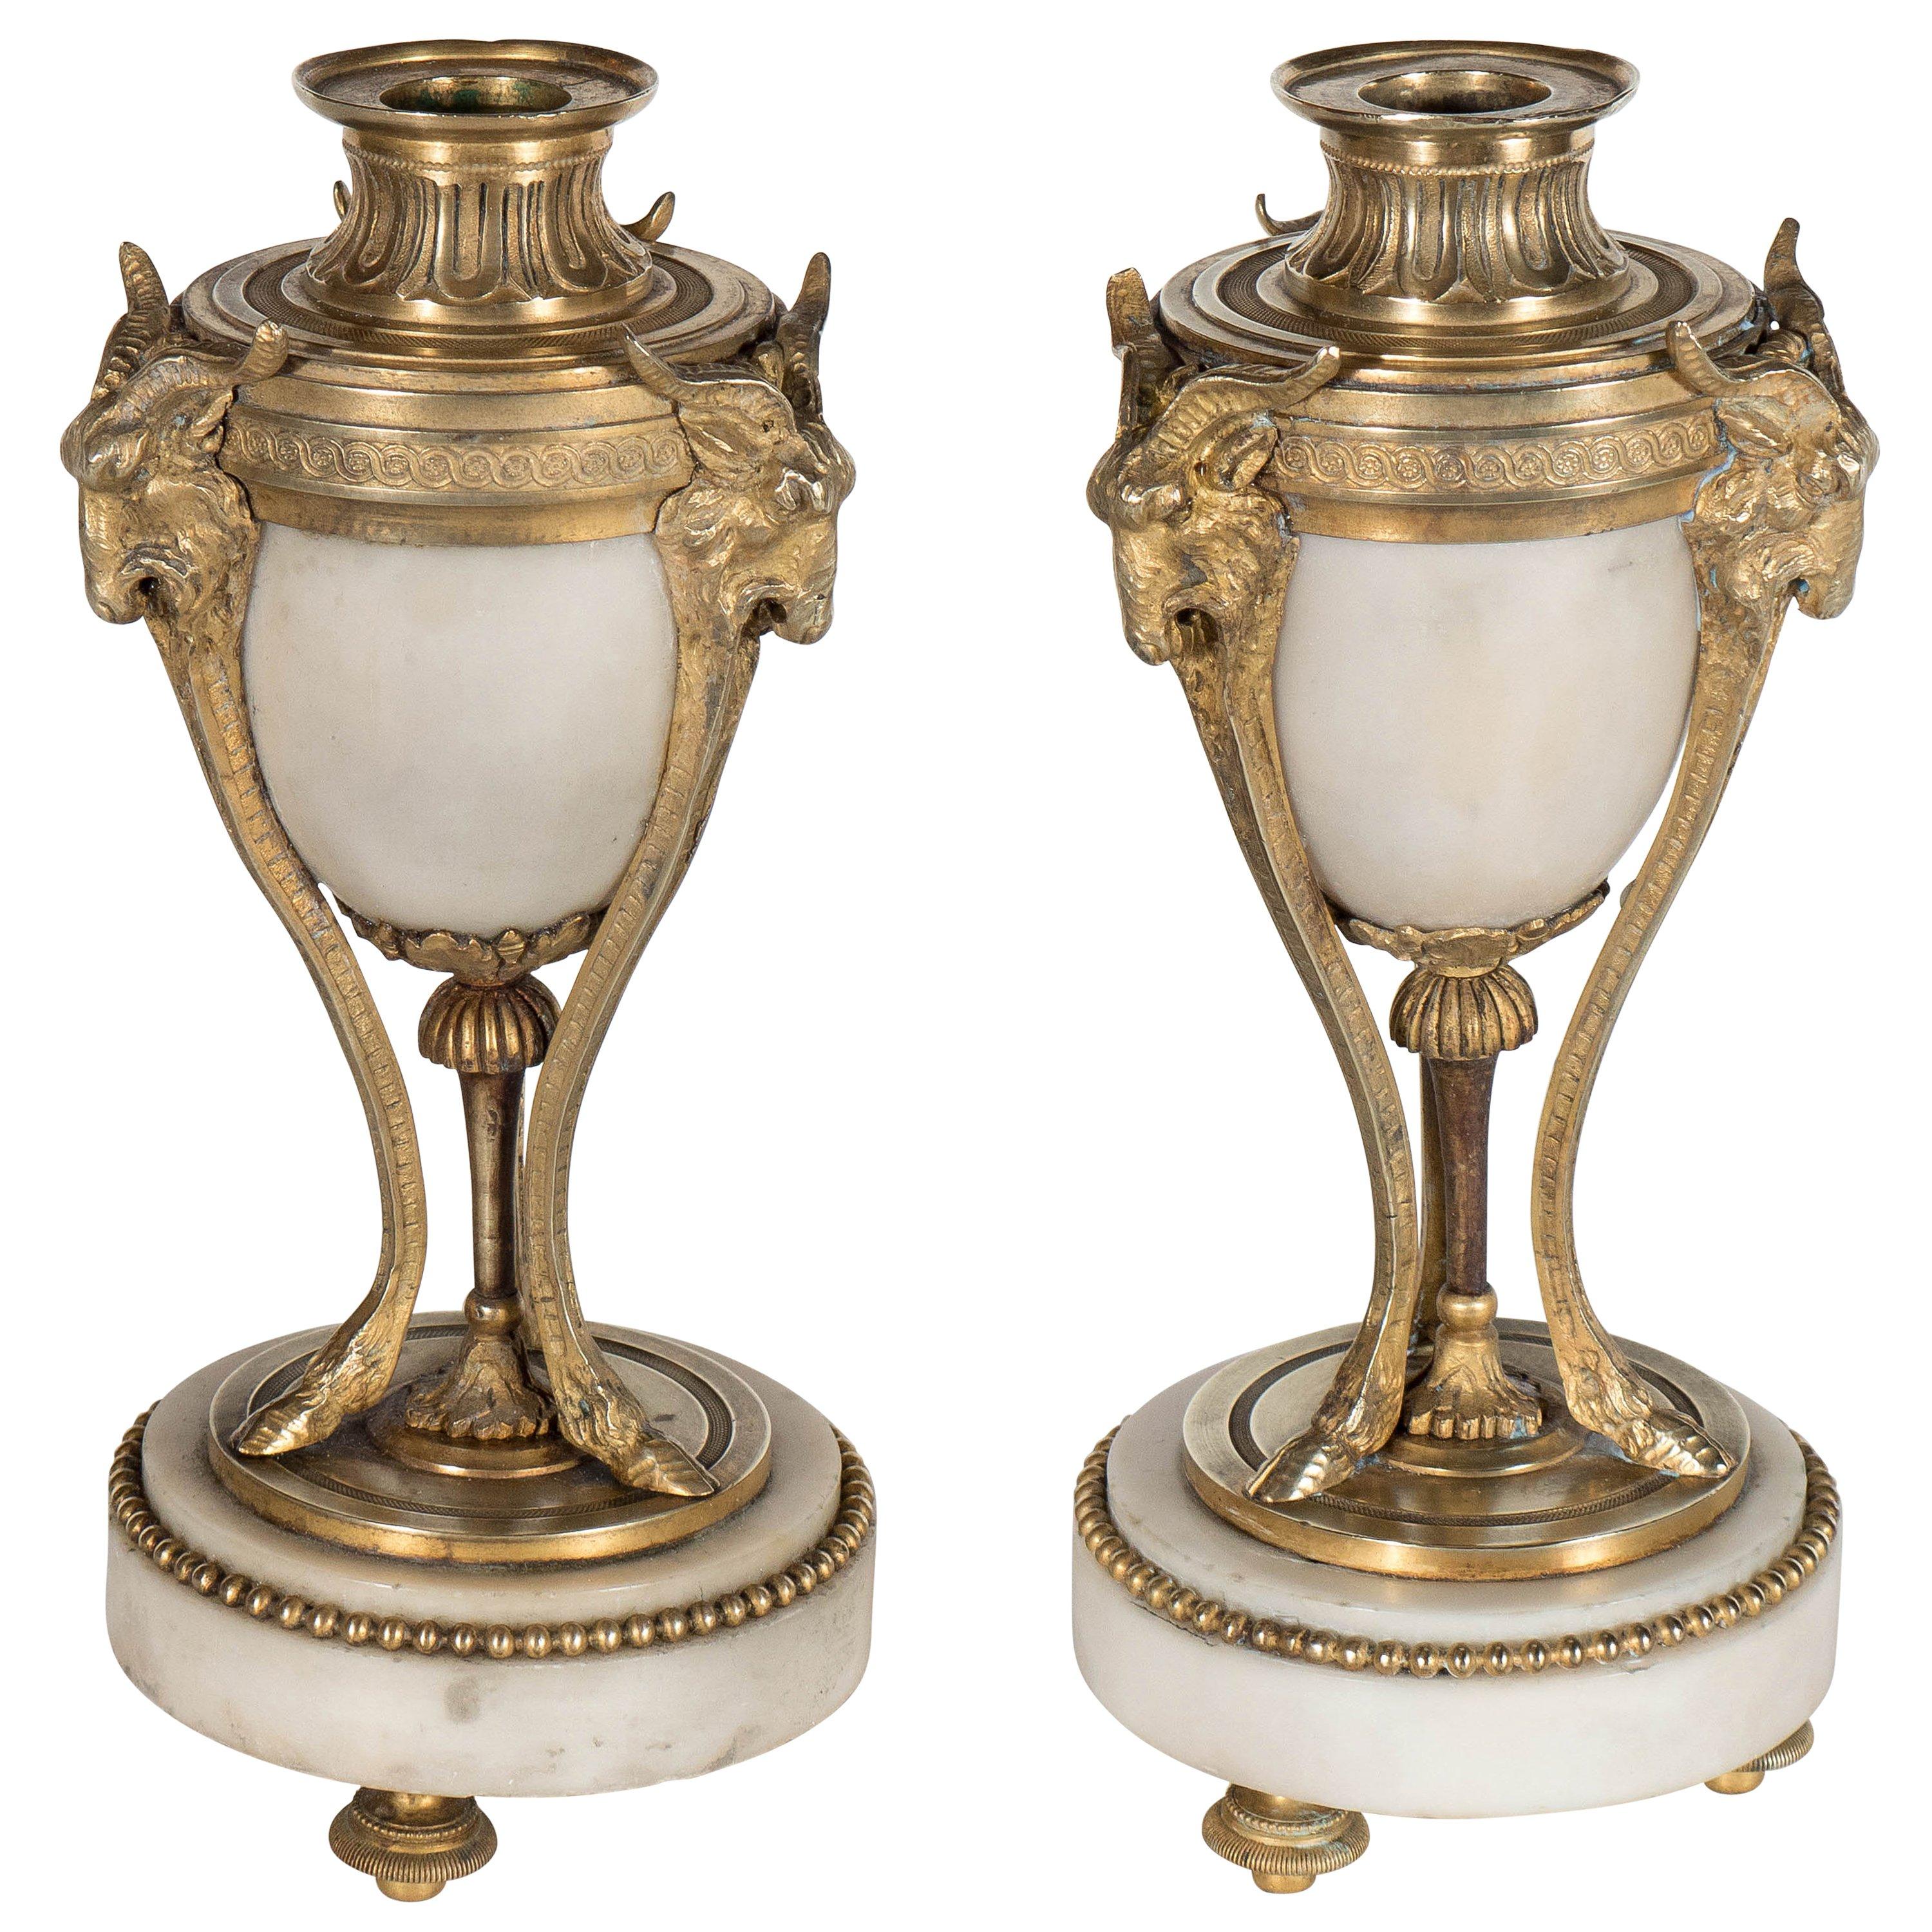 Pair of Fine French Ormolu and Alabaster Candlesticks with Goat & Hoof Motif For Sale